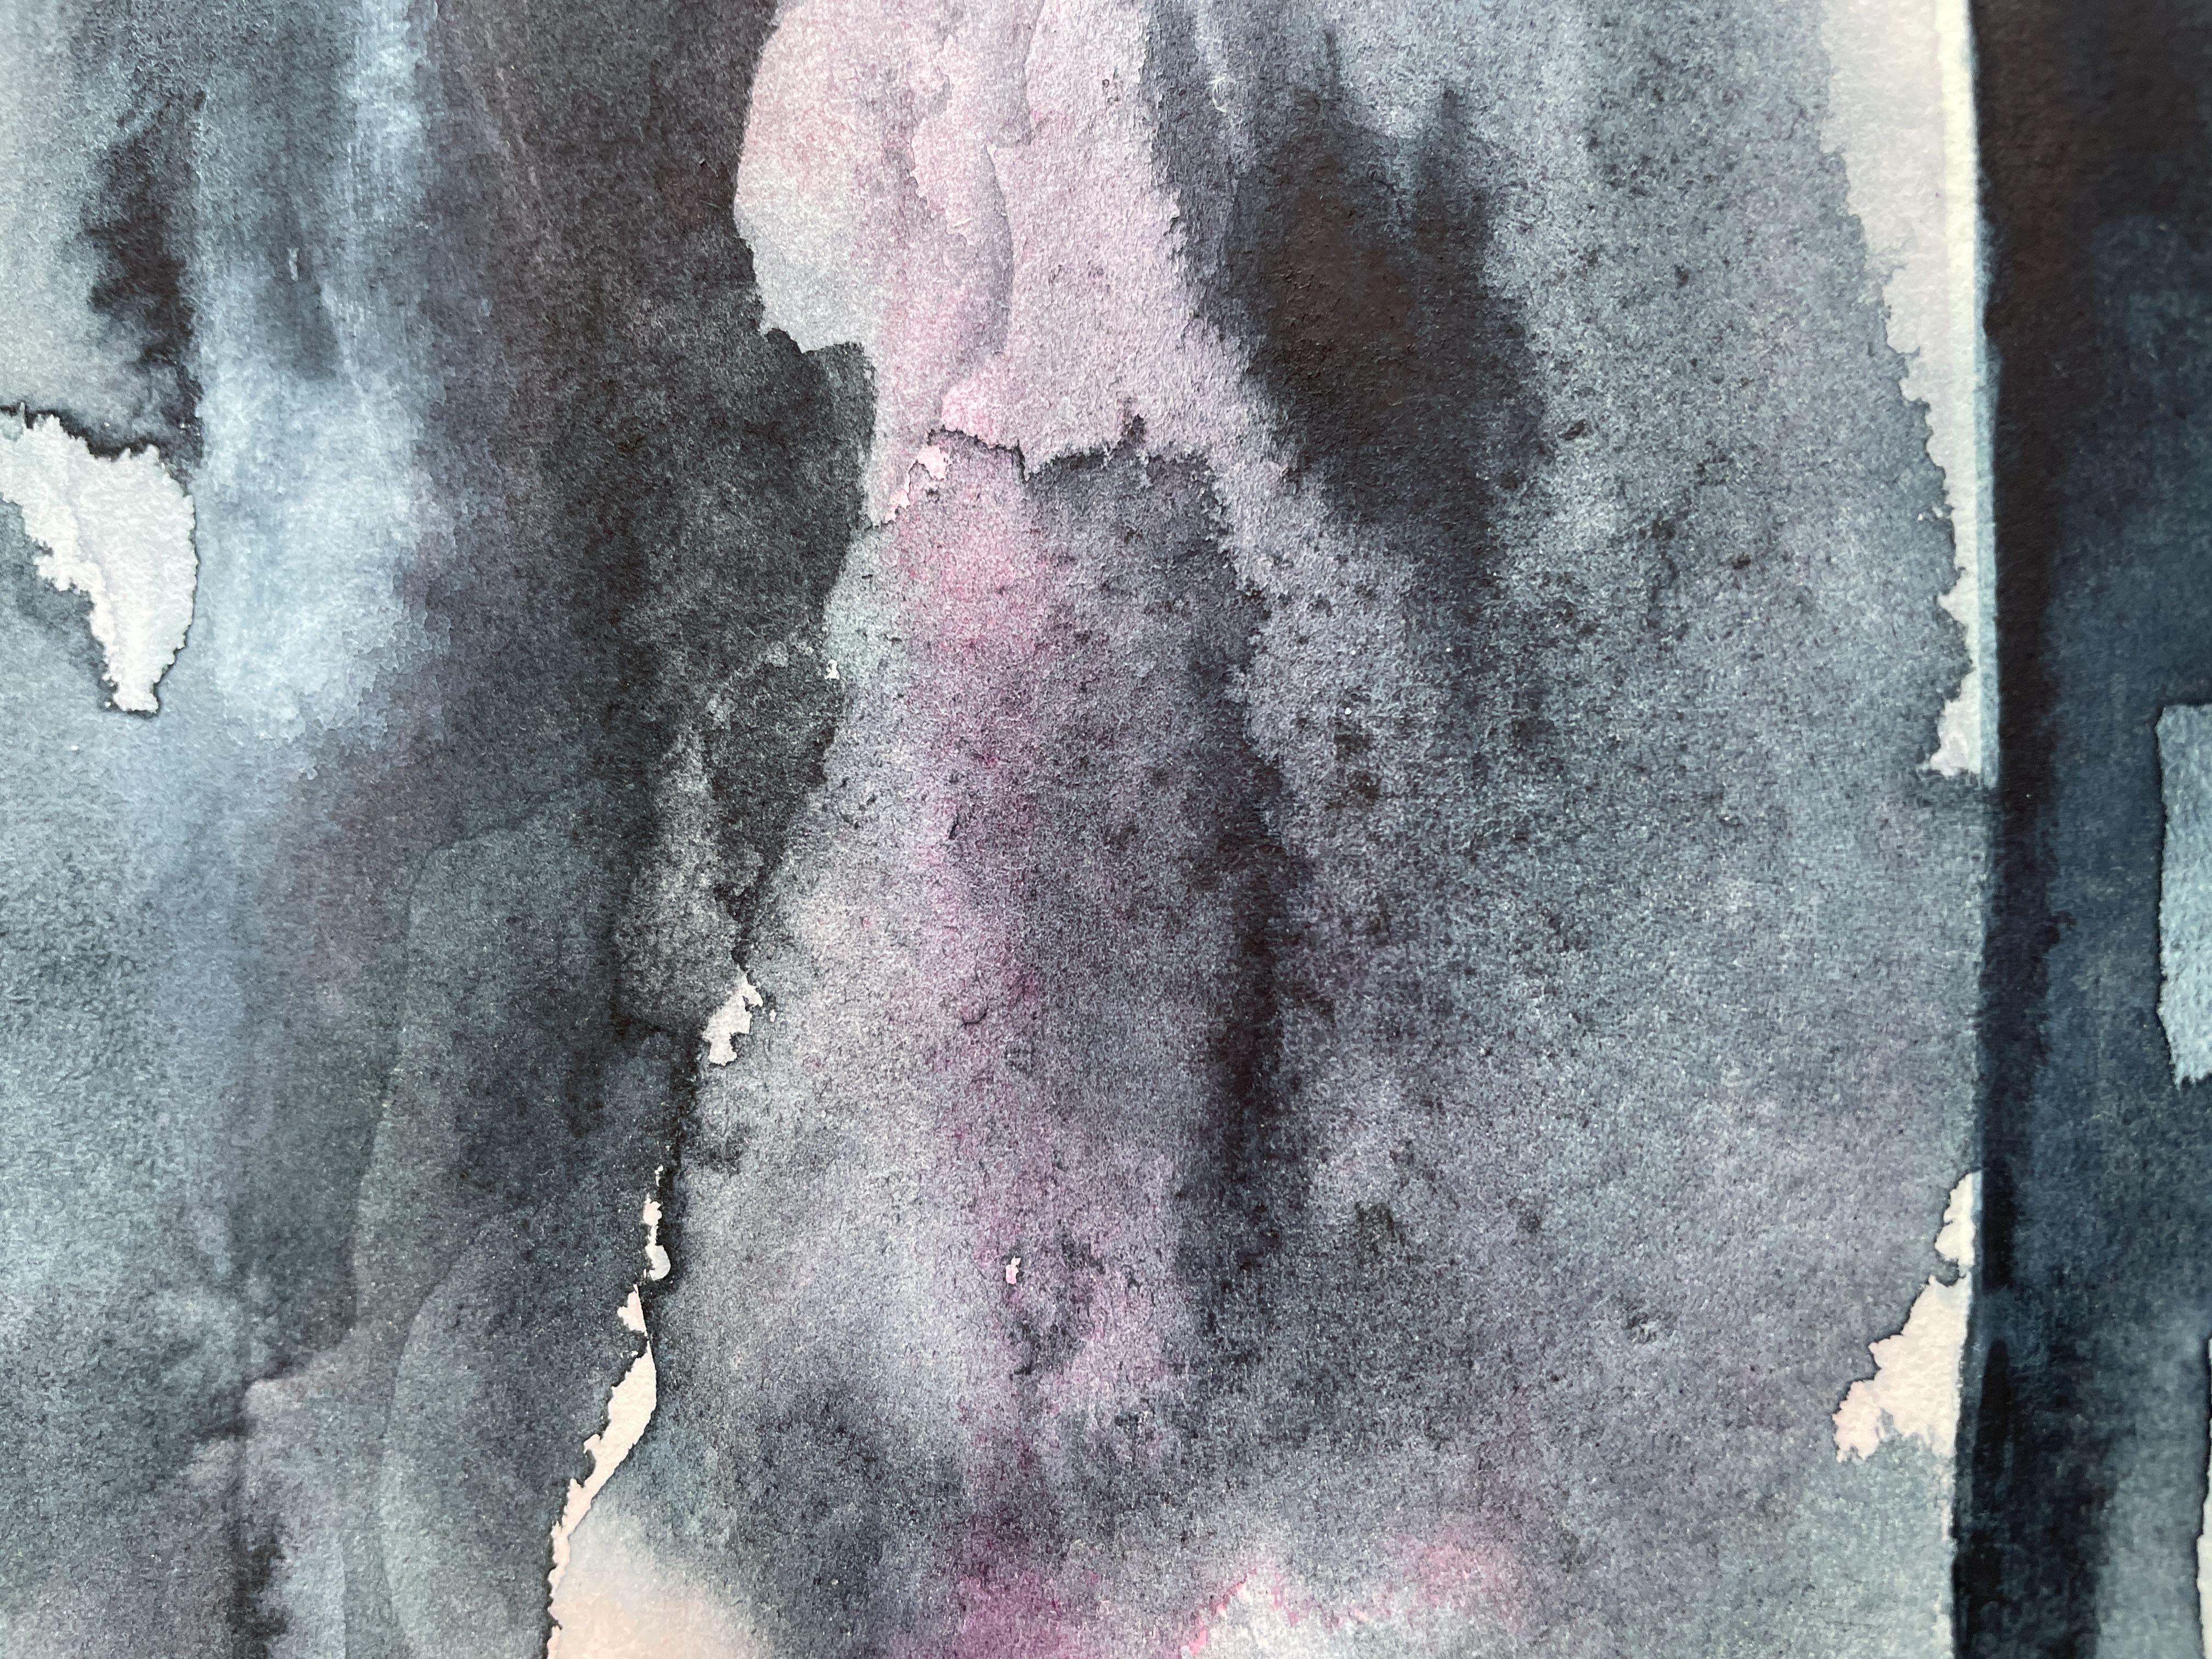 It's All About Clouds, Painting, Watercolor on Paper - Contemporary Art by Gesa Reuter